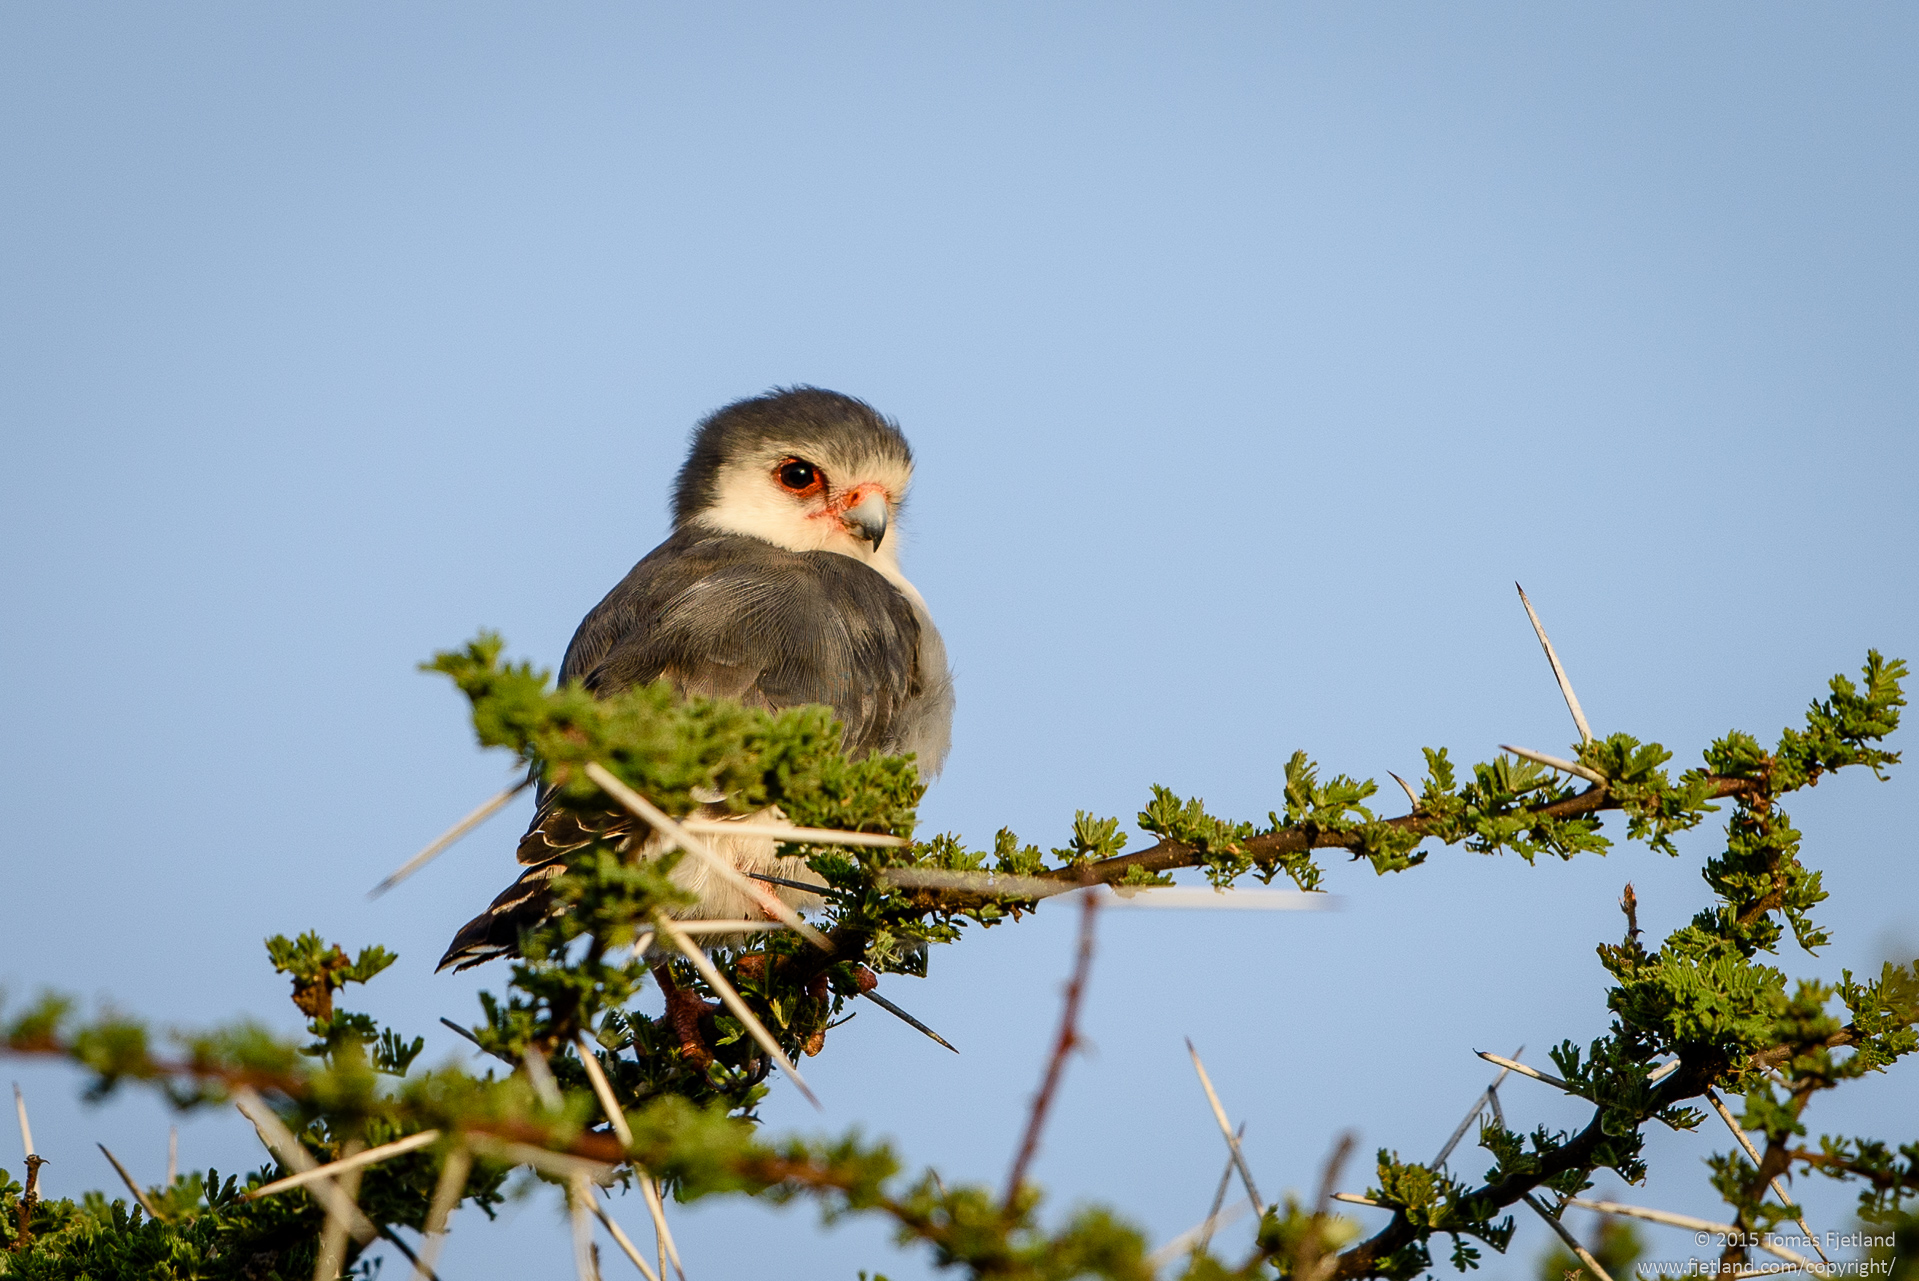 These small falcons prey on insects, small reptiles and mammals, and don't seem to upset nearby birds as much as other raptors. They will nest in the nests of white-headed buffalo weavers